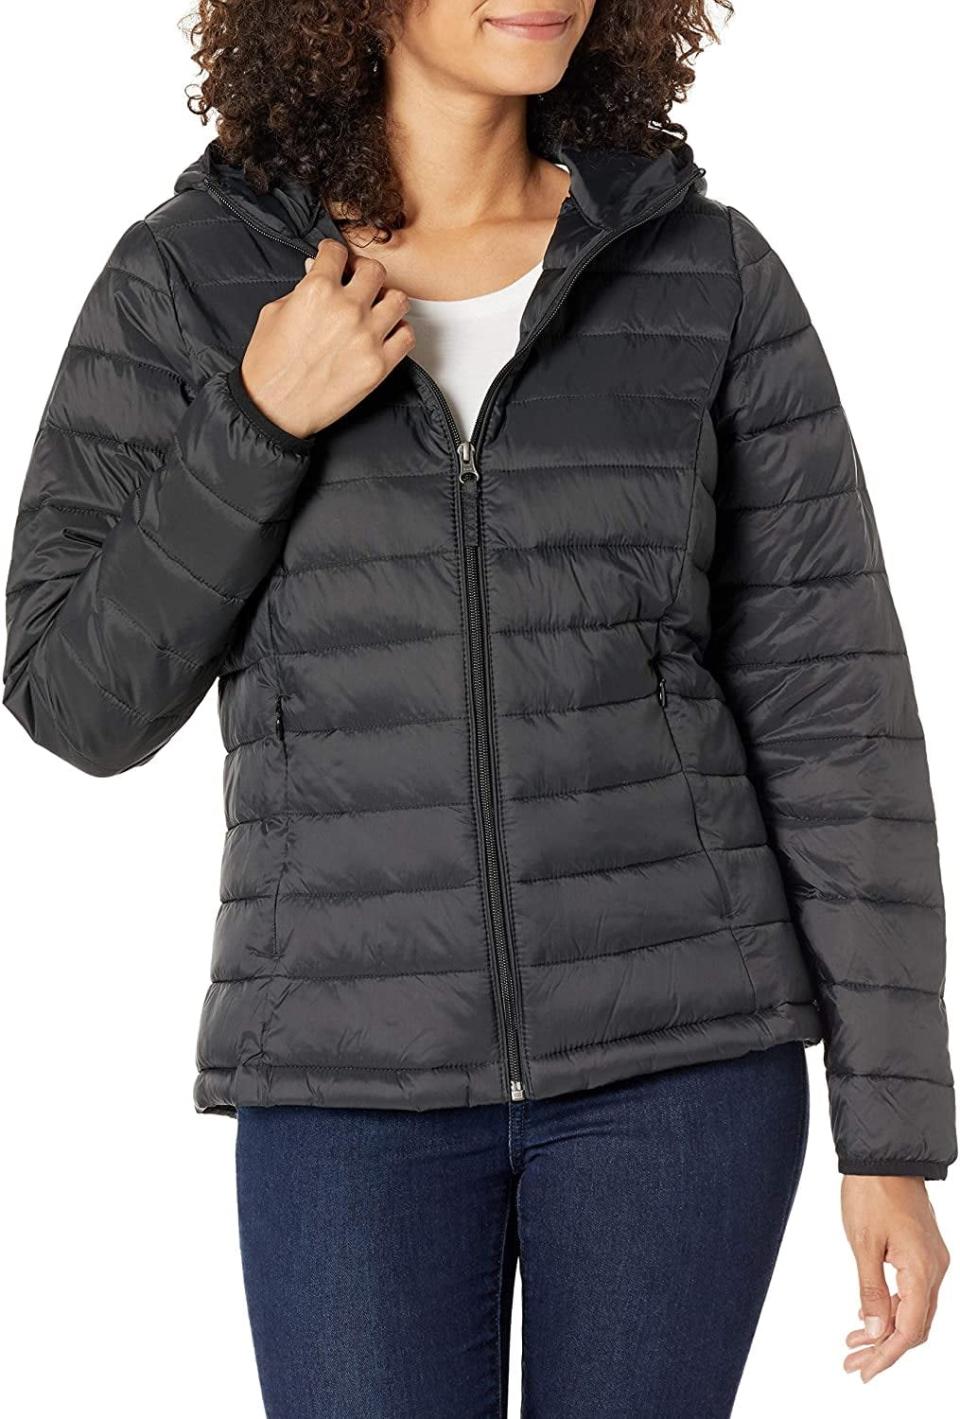 <p>This <span>Amazon Essentials Puffer Jacket</span> ($31, originally $45) is a cozy finishing touch to any look. It will protect you from the winter chills and ensure you look comfortable as you go about your day.</p>